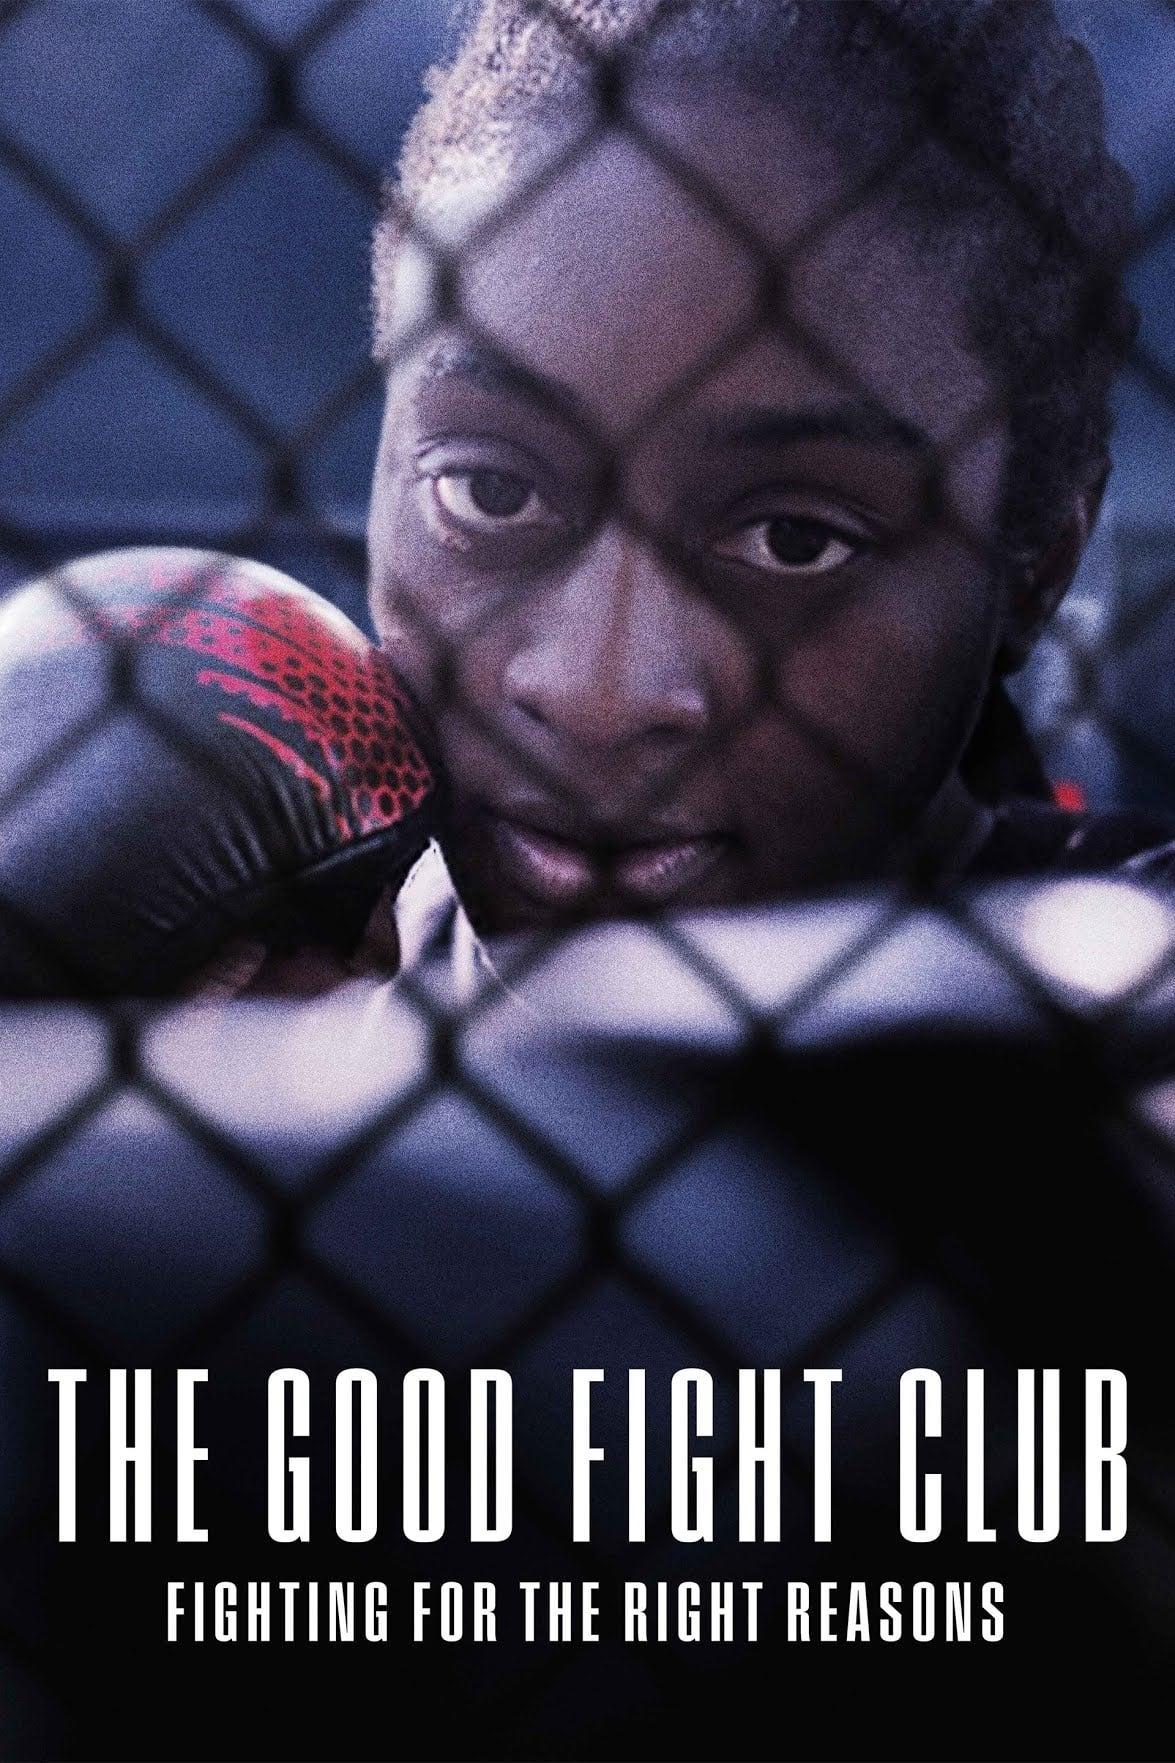 The Good Fight Club poster